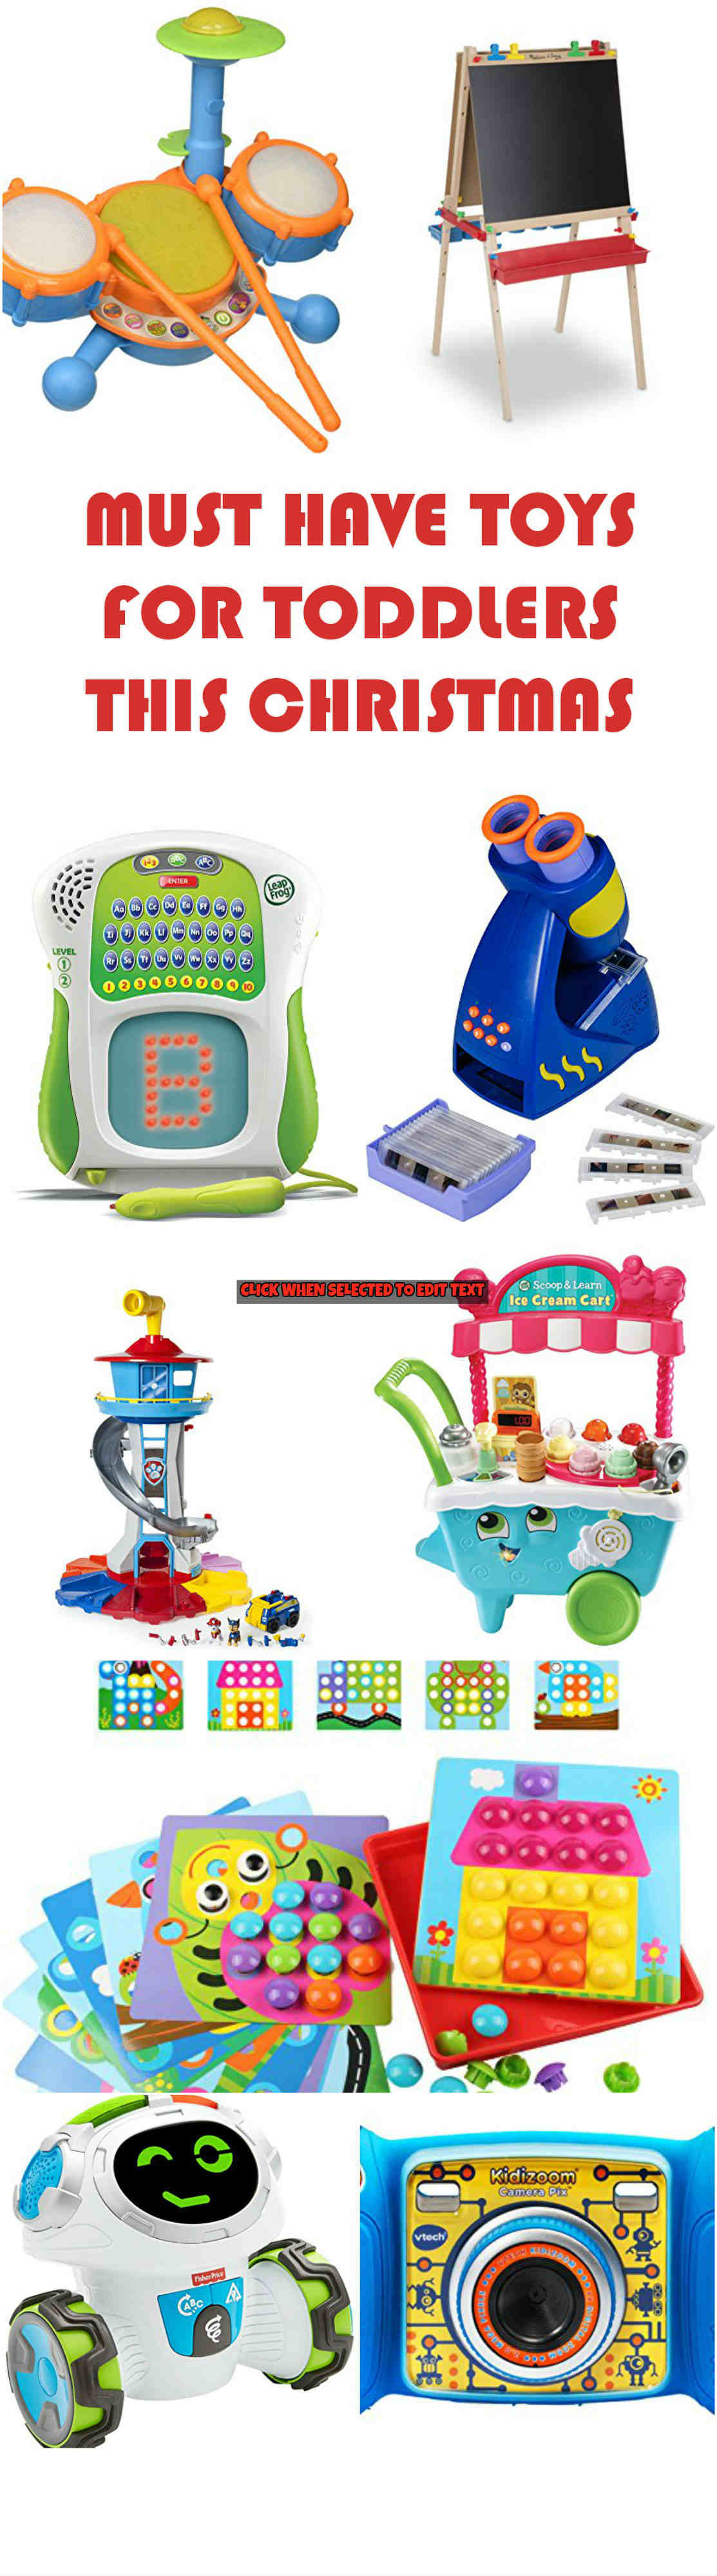 must have toys for toddlers this Christmas